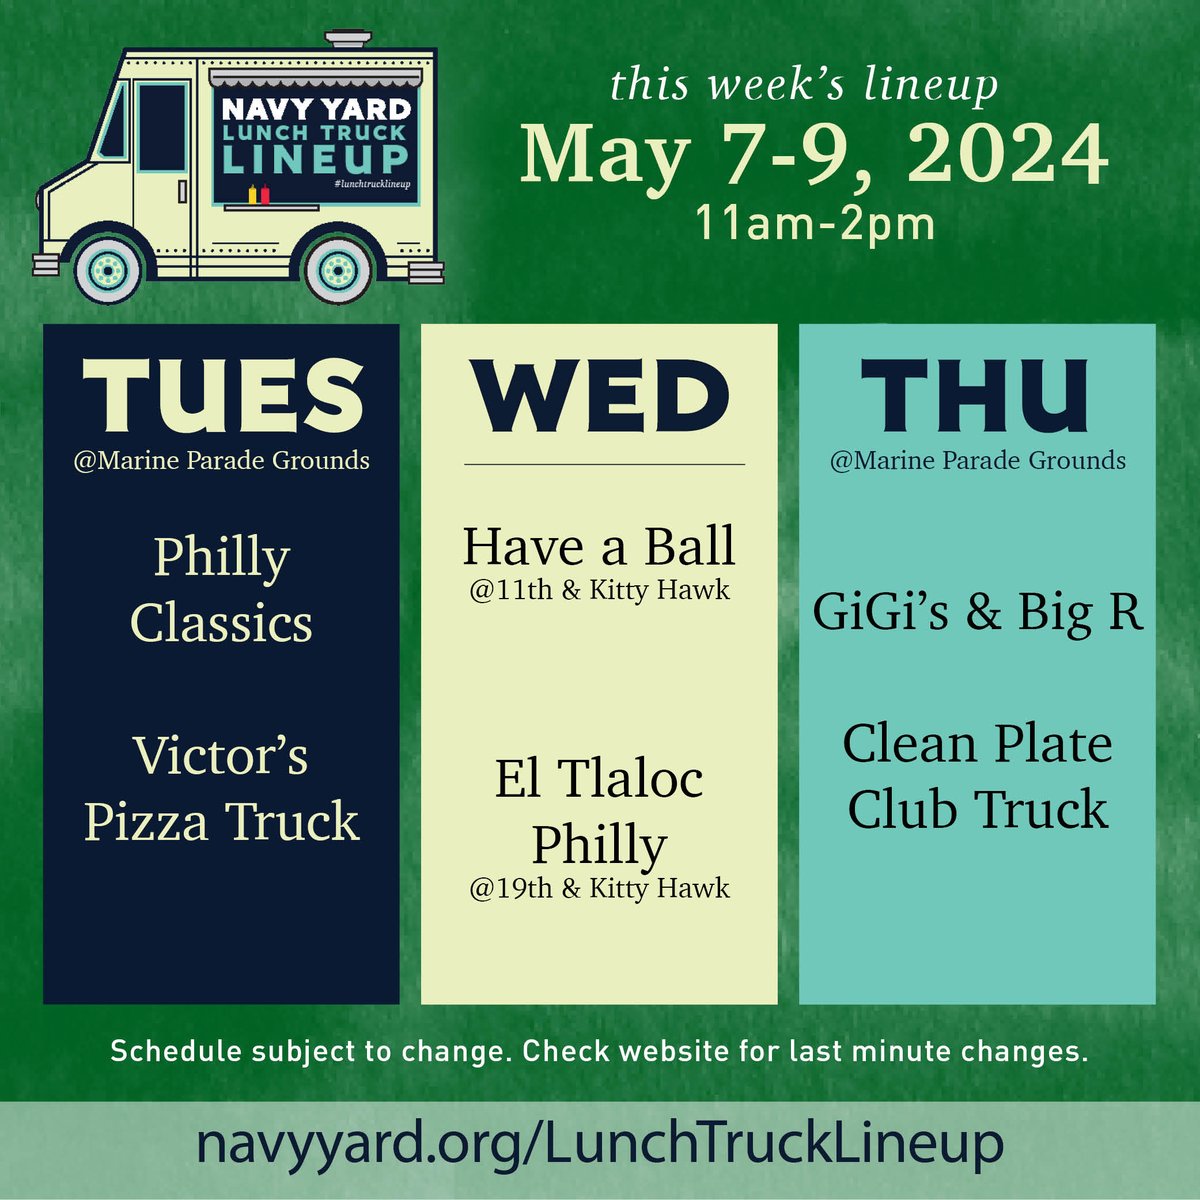 Such a great lineup this week! Check it out!

Tues - Philly Classics and Victor's Pizza Truck
Wed - Have a Ball and El Tlaloc Philly
Thurs - GiGi's and Clean Plate Club

#navyyardeats #discovertheyard #navyyardphilly #lunchtrucklineup